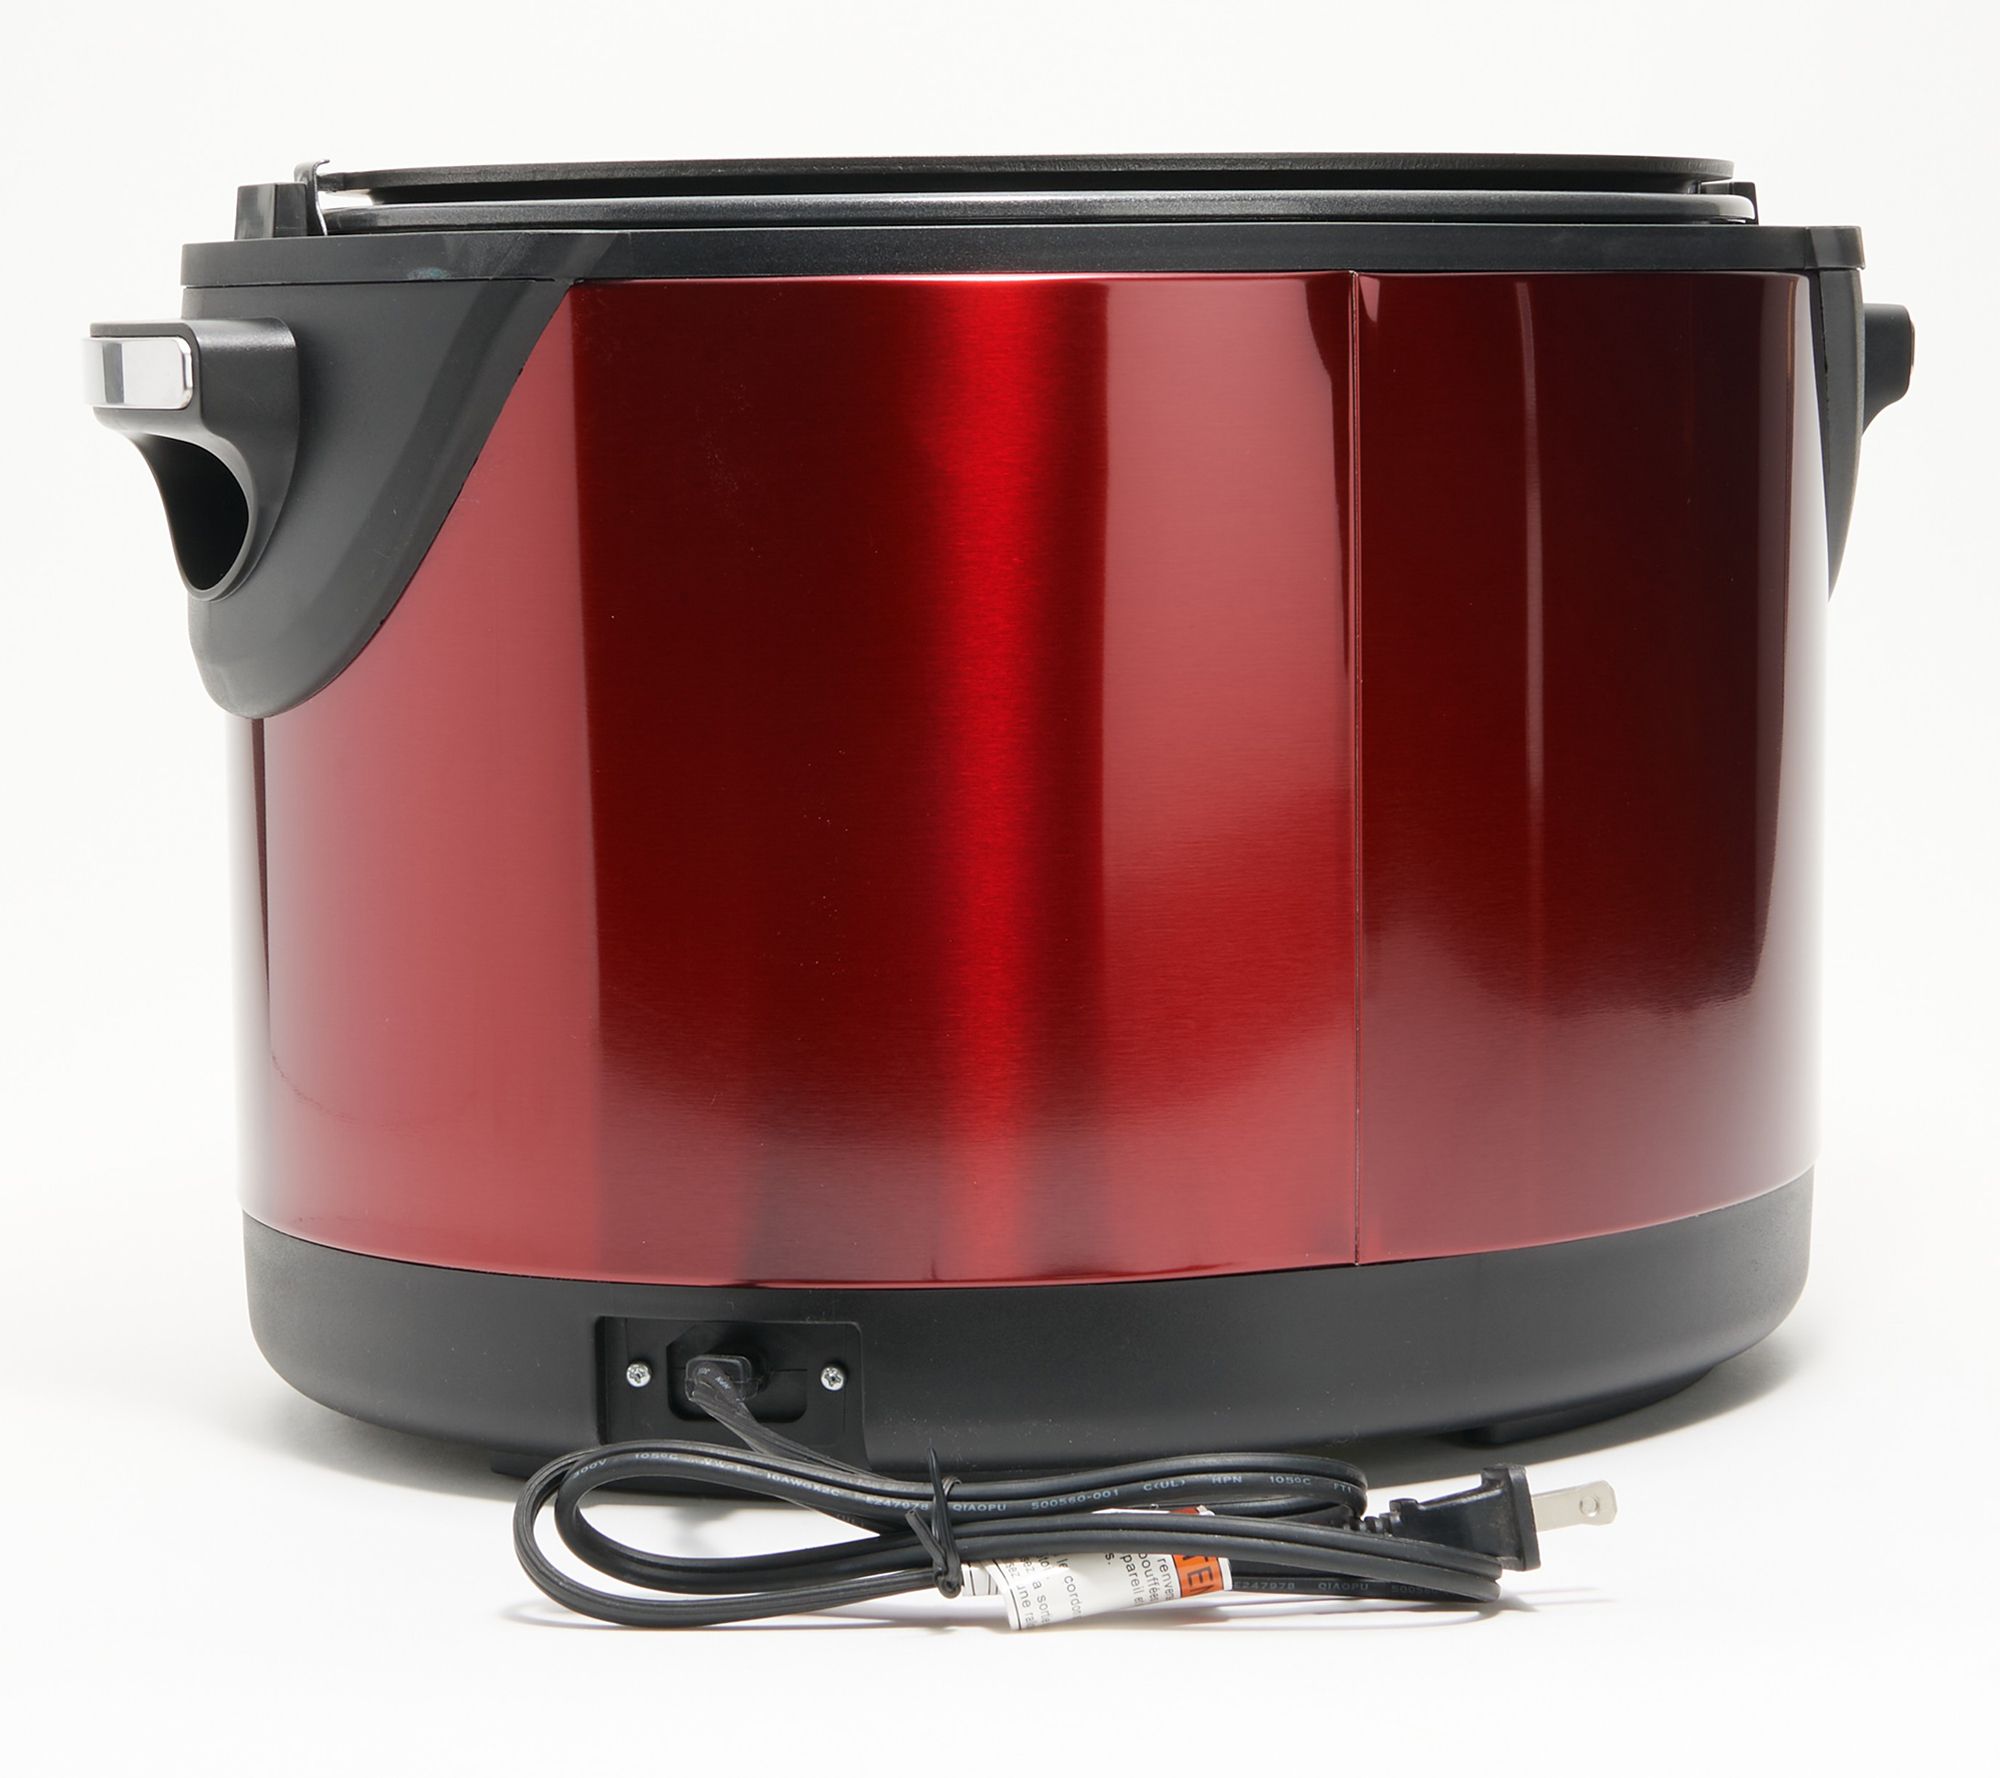 CooksEssentials 4 Qt Digital Stainless Steel Everyday Pressure Cooker - QVC .com